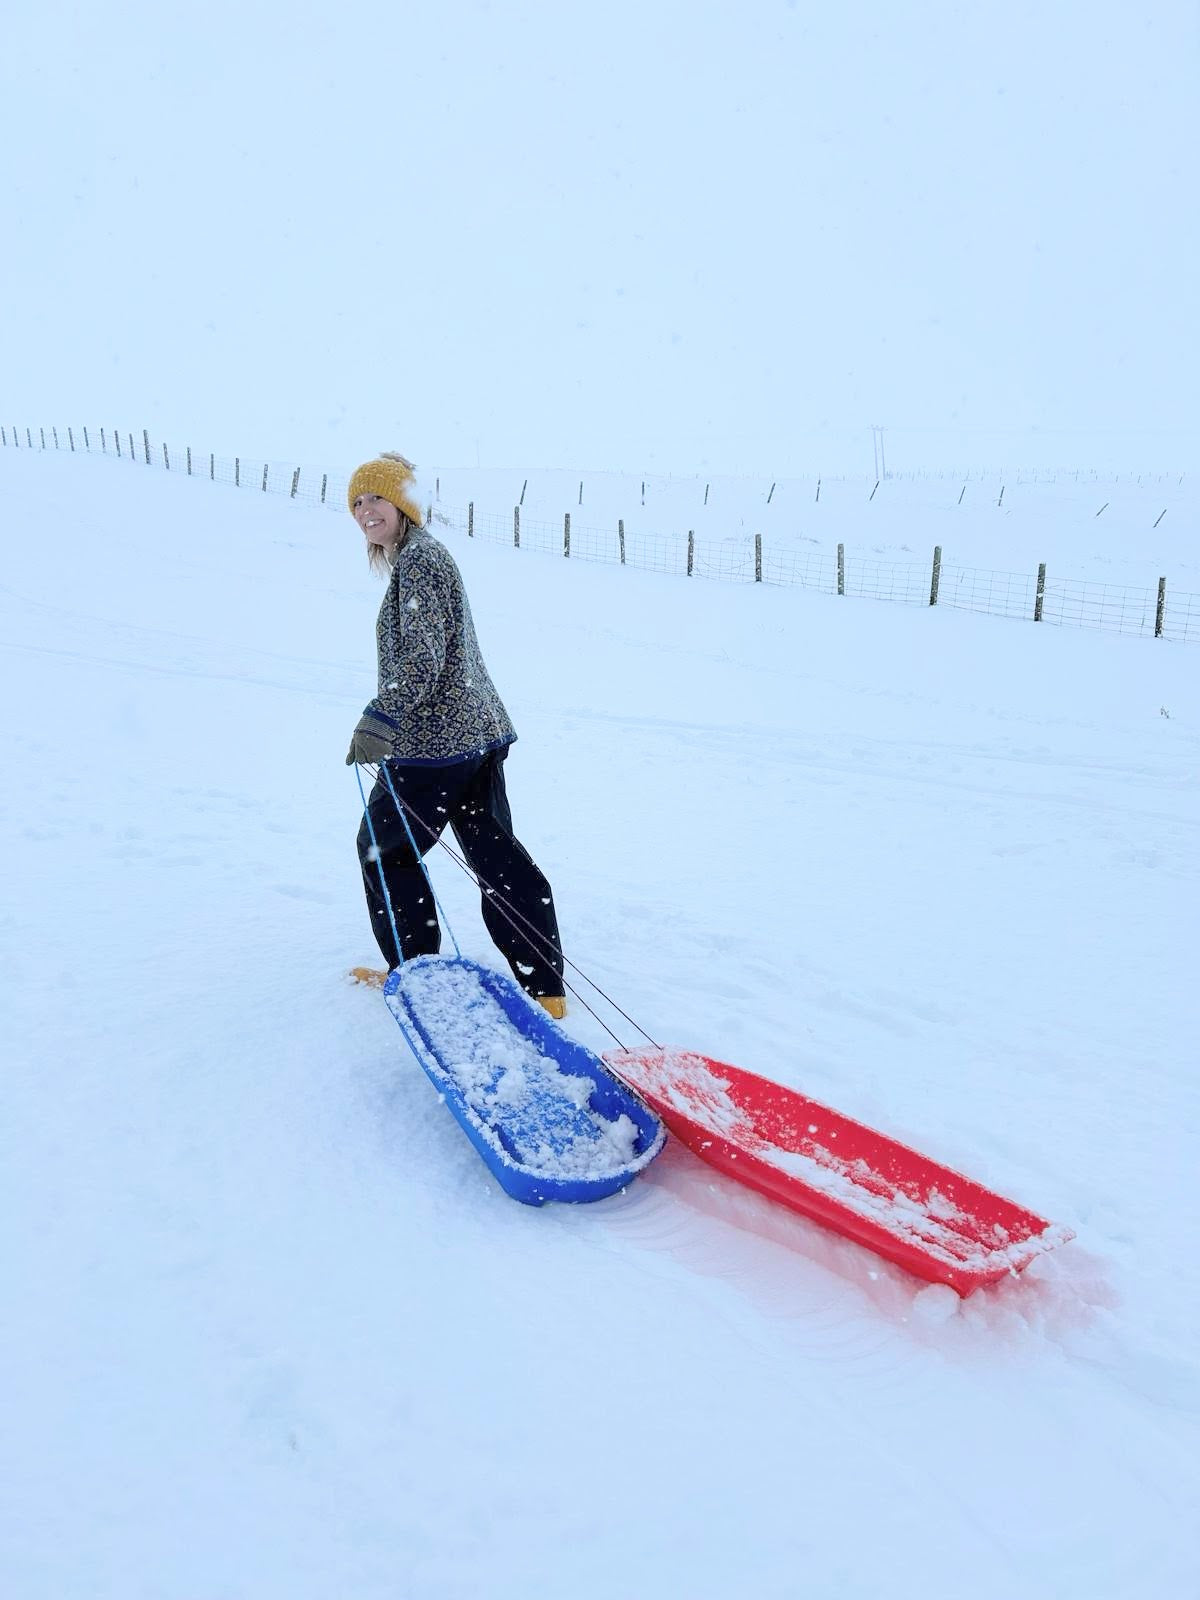 A white woman pulls a sledge up a snow covered slope in Hoswick, Shetland. She is wearing an allover Fair Isle jumper in yellow and dark petrol blue, a yellow bobble hat, black waterproof trousers and yellow wellies.